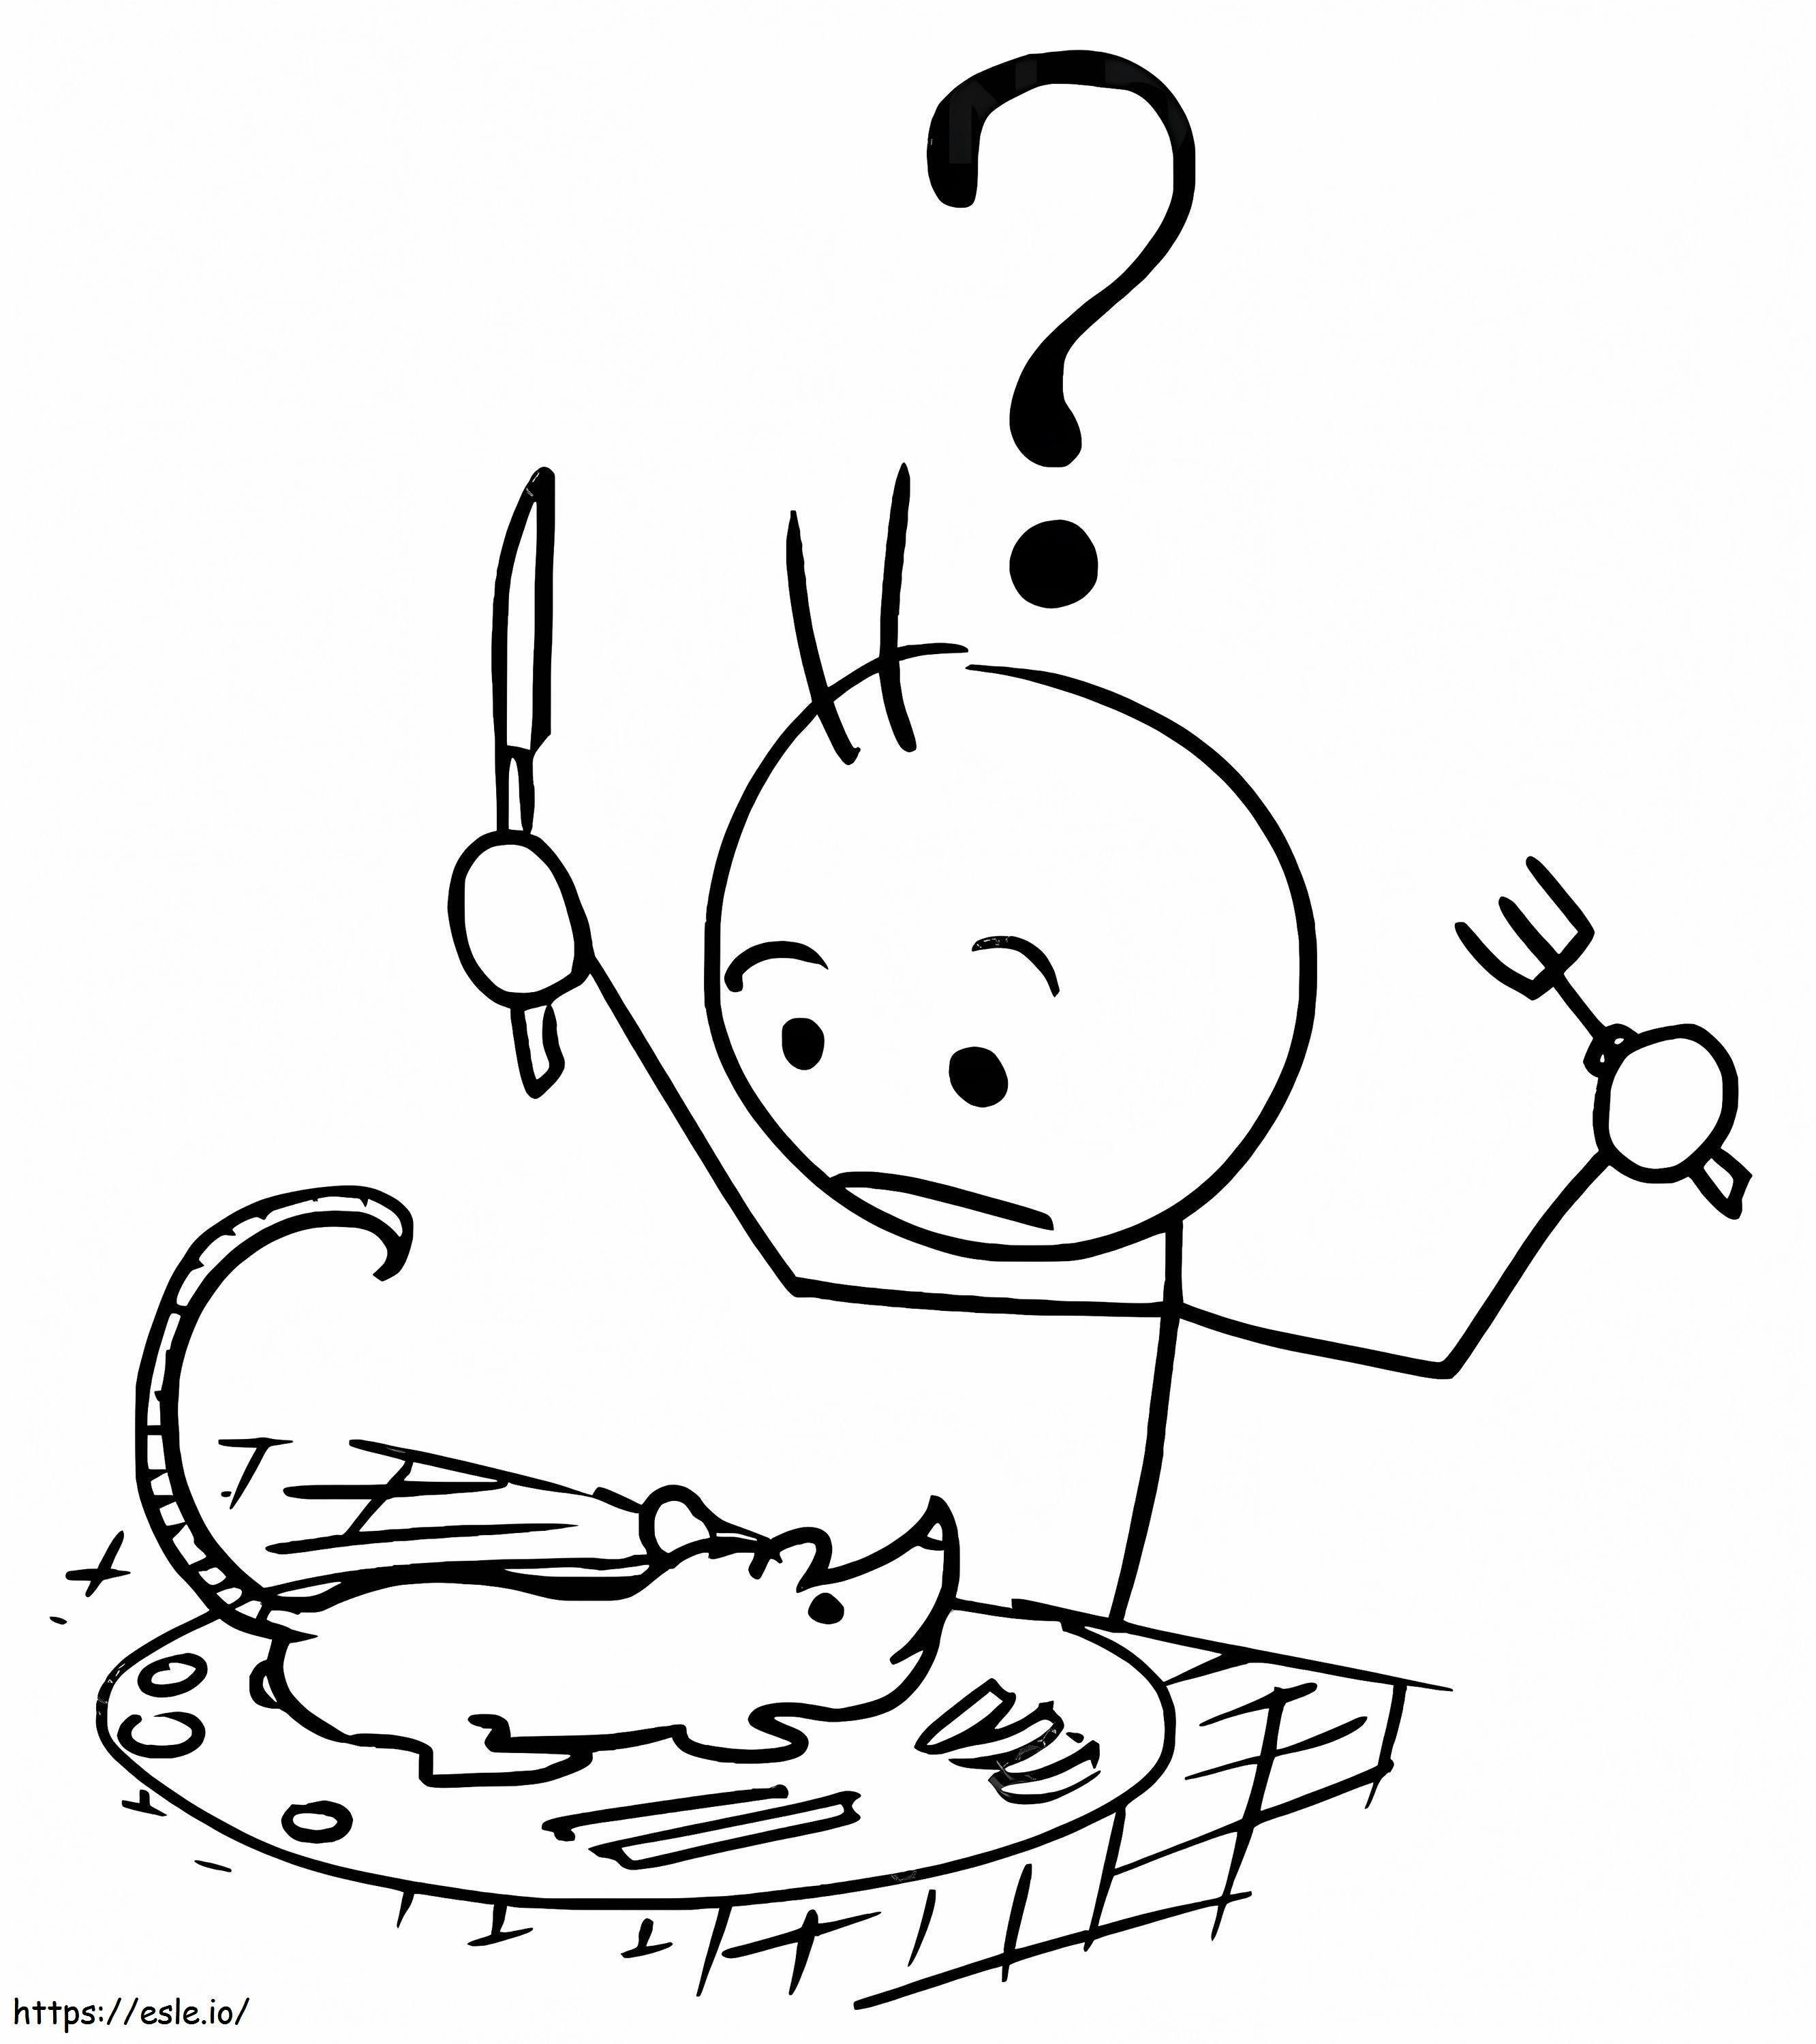 Stickman And A Mouse coloring page